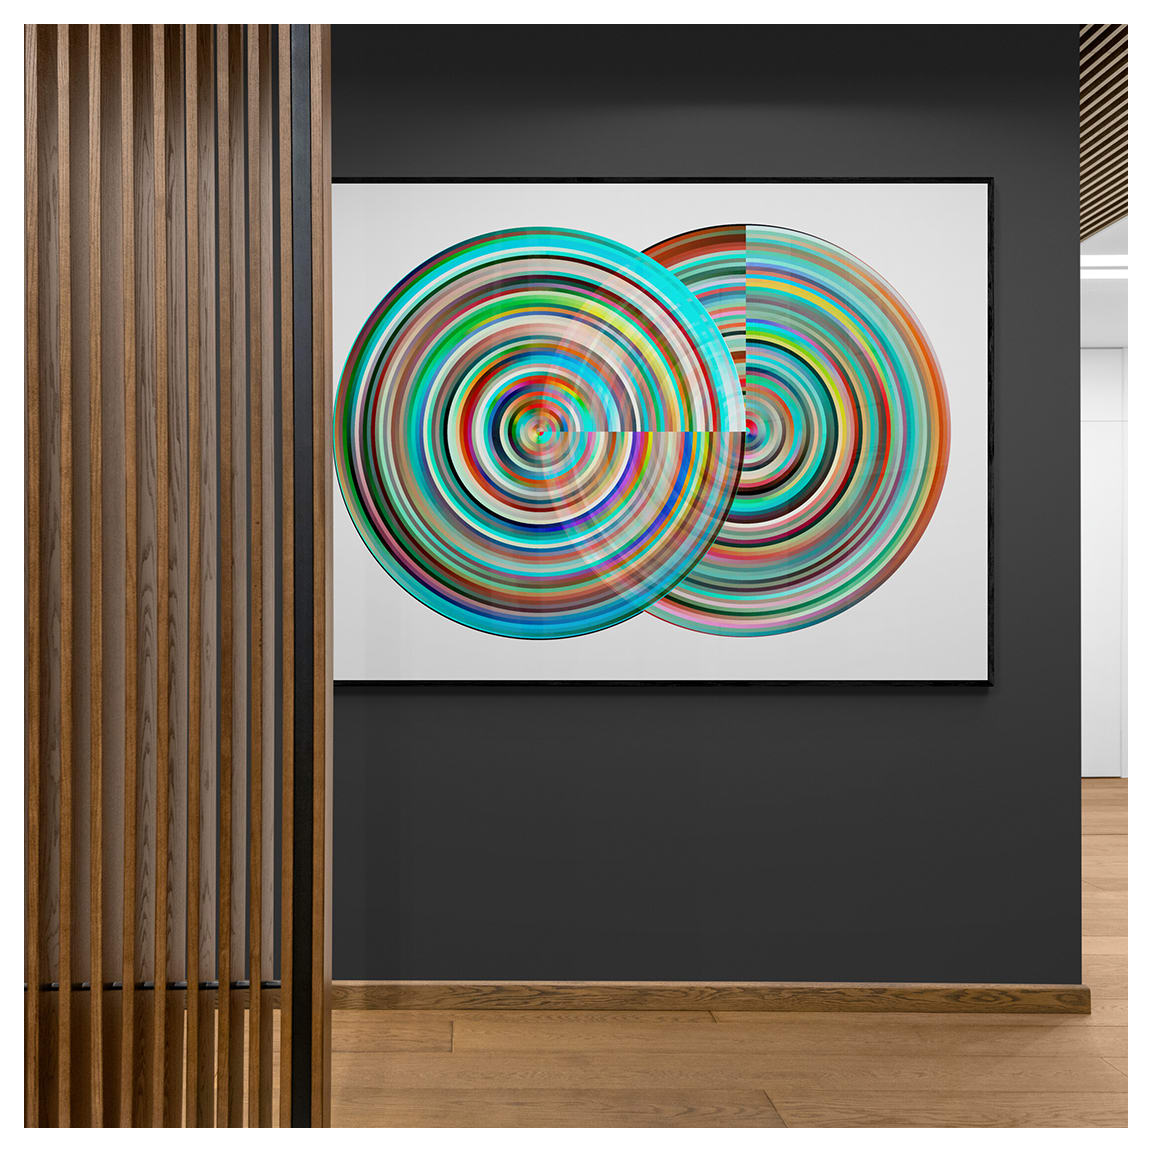 Double Bubbles by Kelly Hart  Image:  Double Bubbles, 50" x 36" (installed view) -